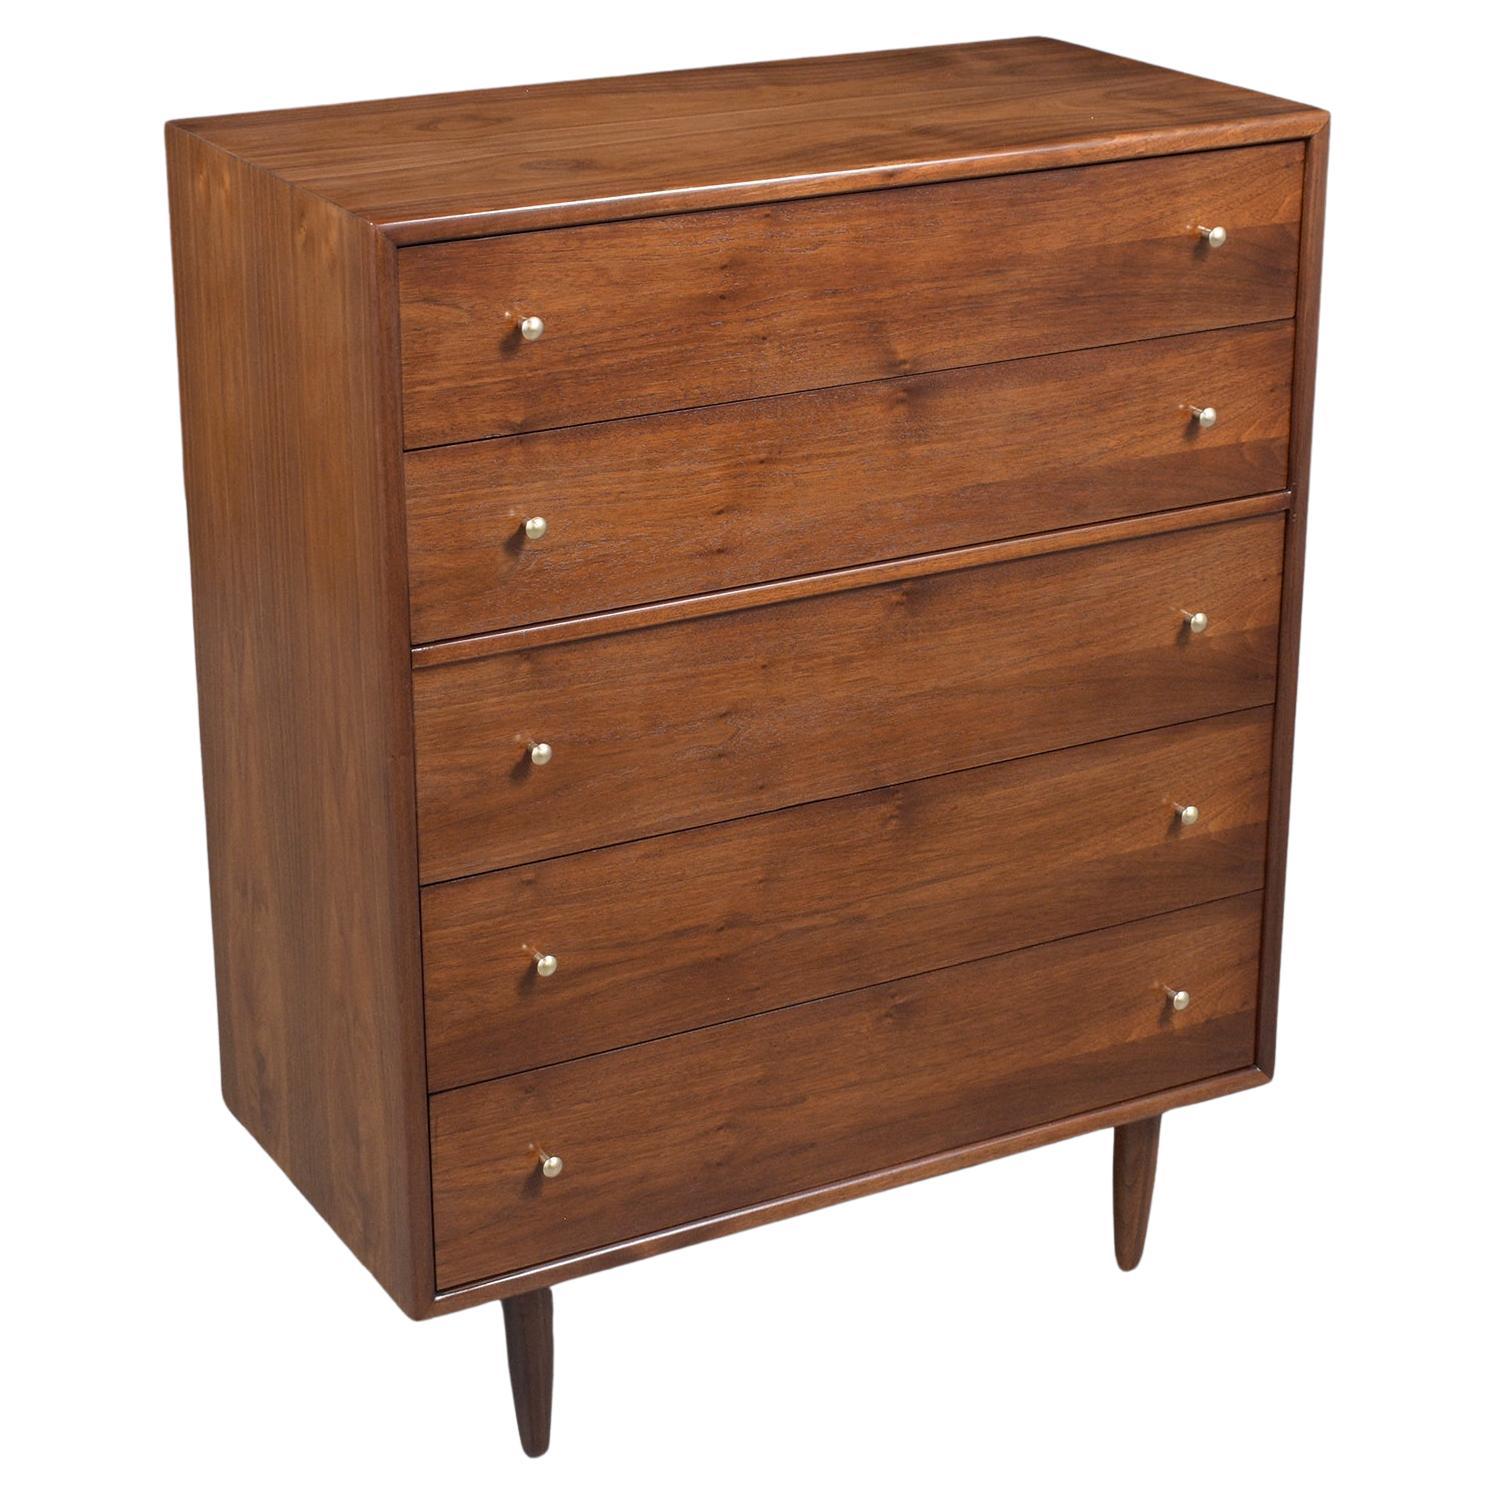 Immerse yourself in the elegance of Danish design with our meticulously restored Danish modern dresser from the 1960s. Crafted from premium mahogany wood by our skilled in-house craftsmen, this dresser epitomizes the perfect balance of form and